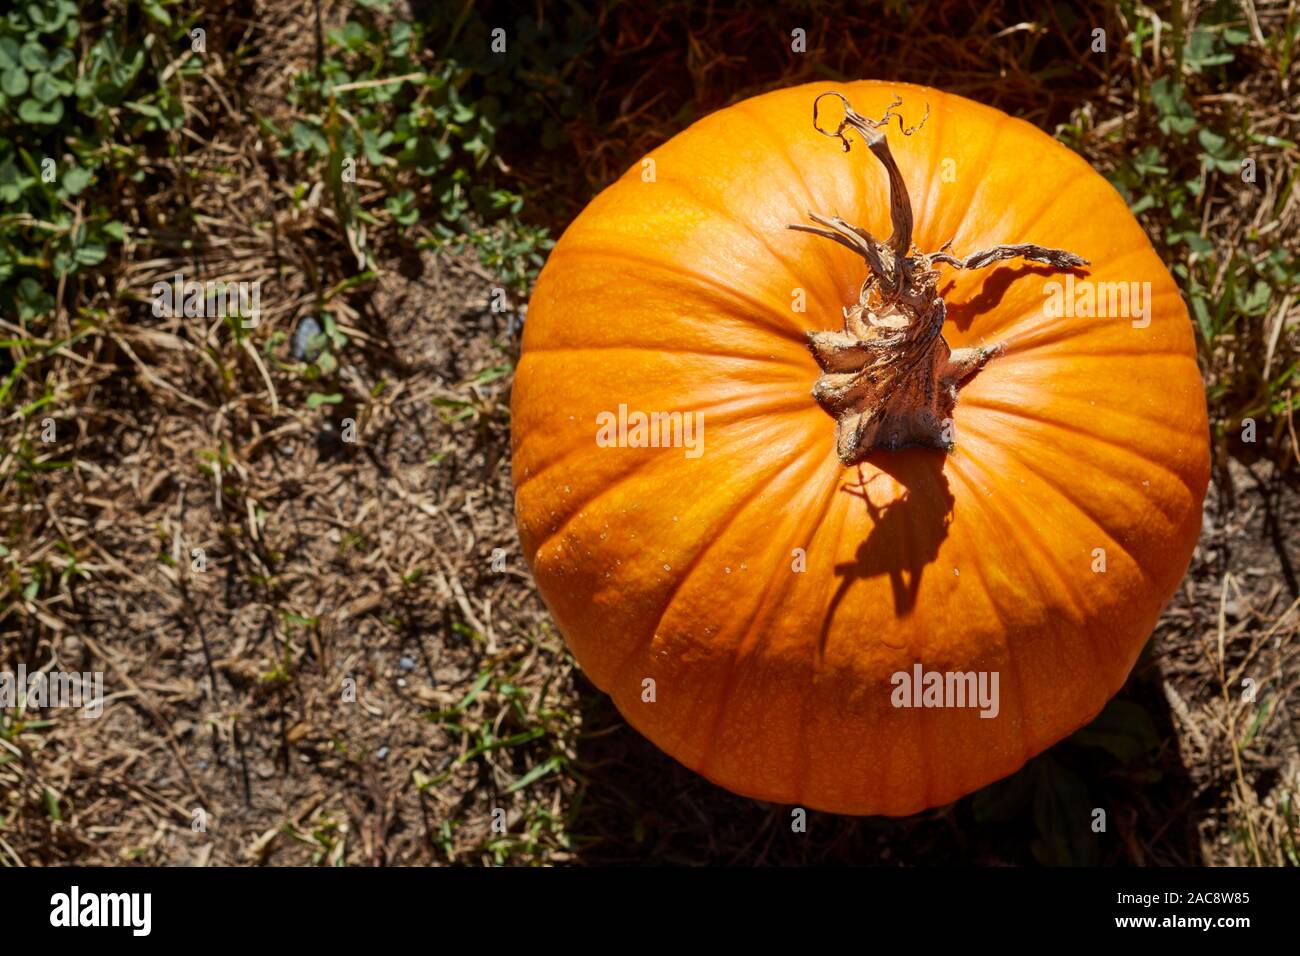 A whole fresh orange Pumpkin at a farm in Berks County, Pennsylvania, USA. Sometimes called marrow in the UK Stock Photo